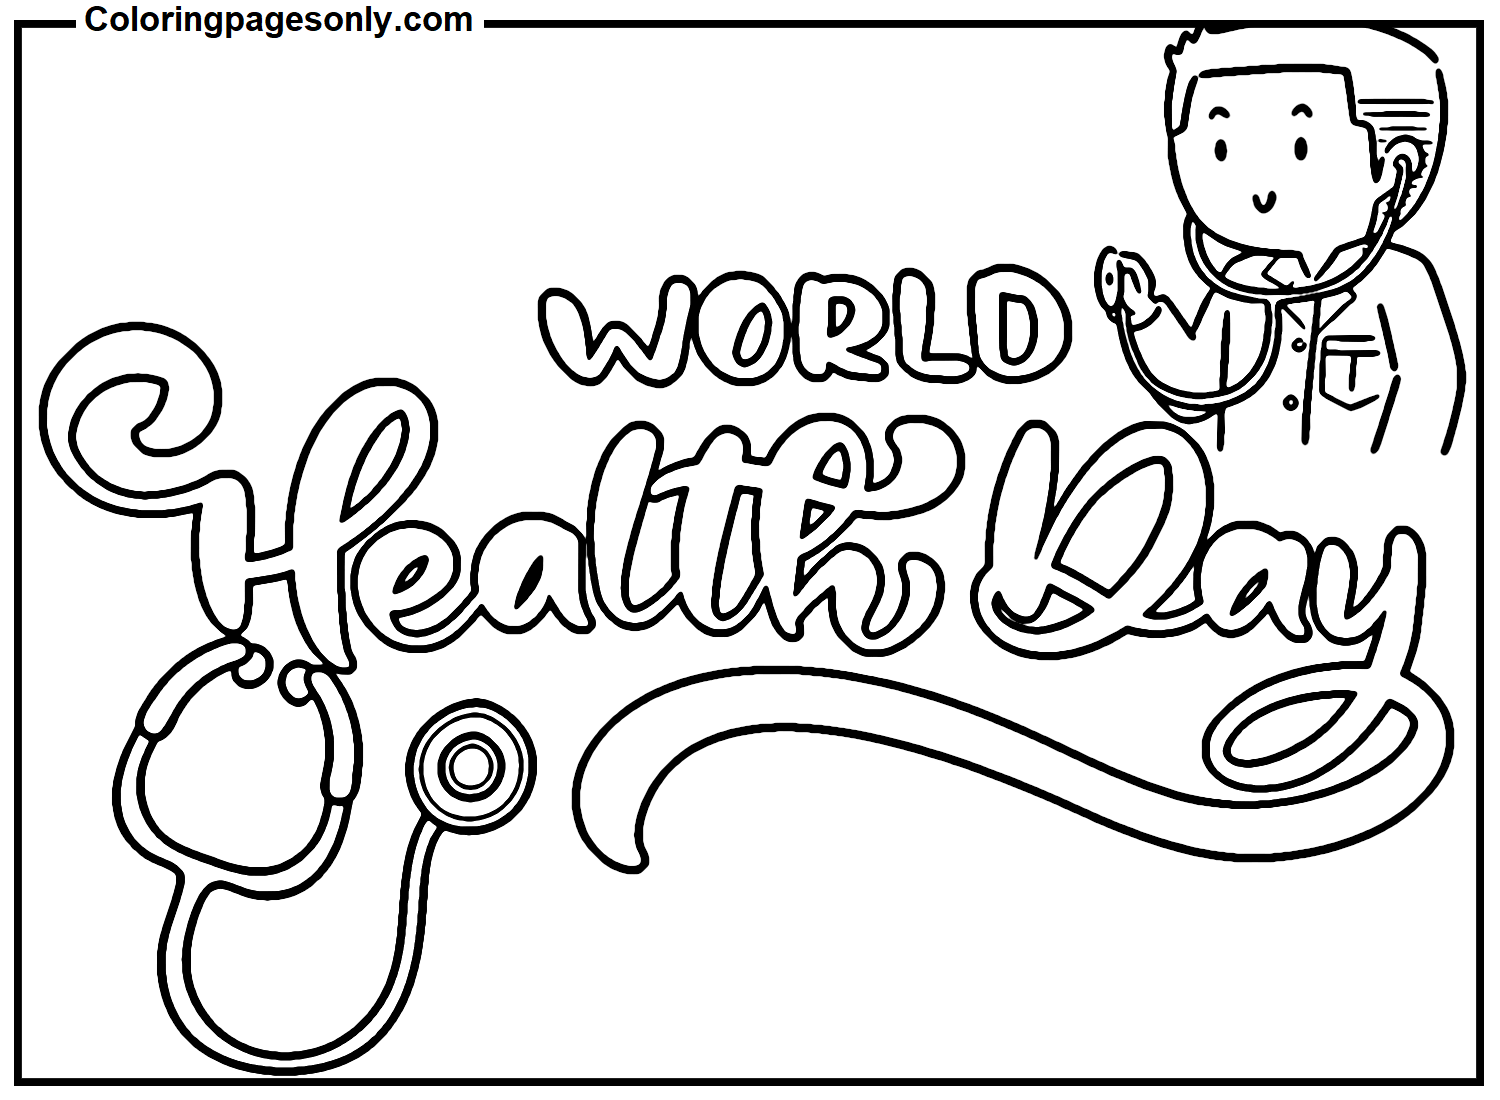 Images World Health Day Coloring Page